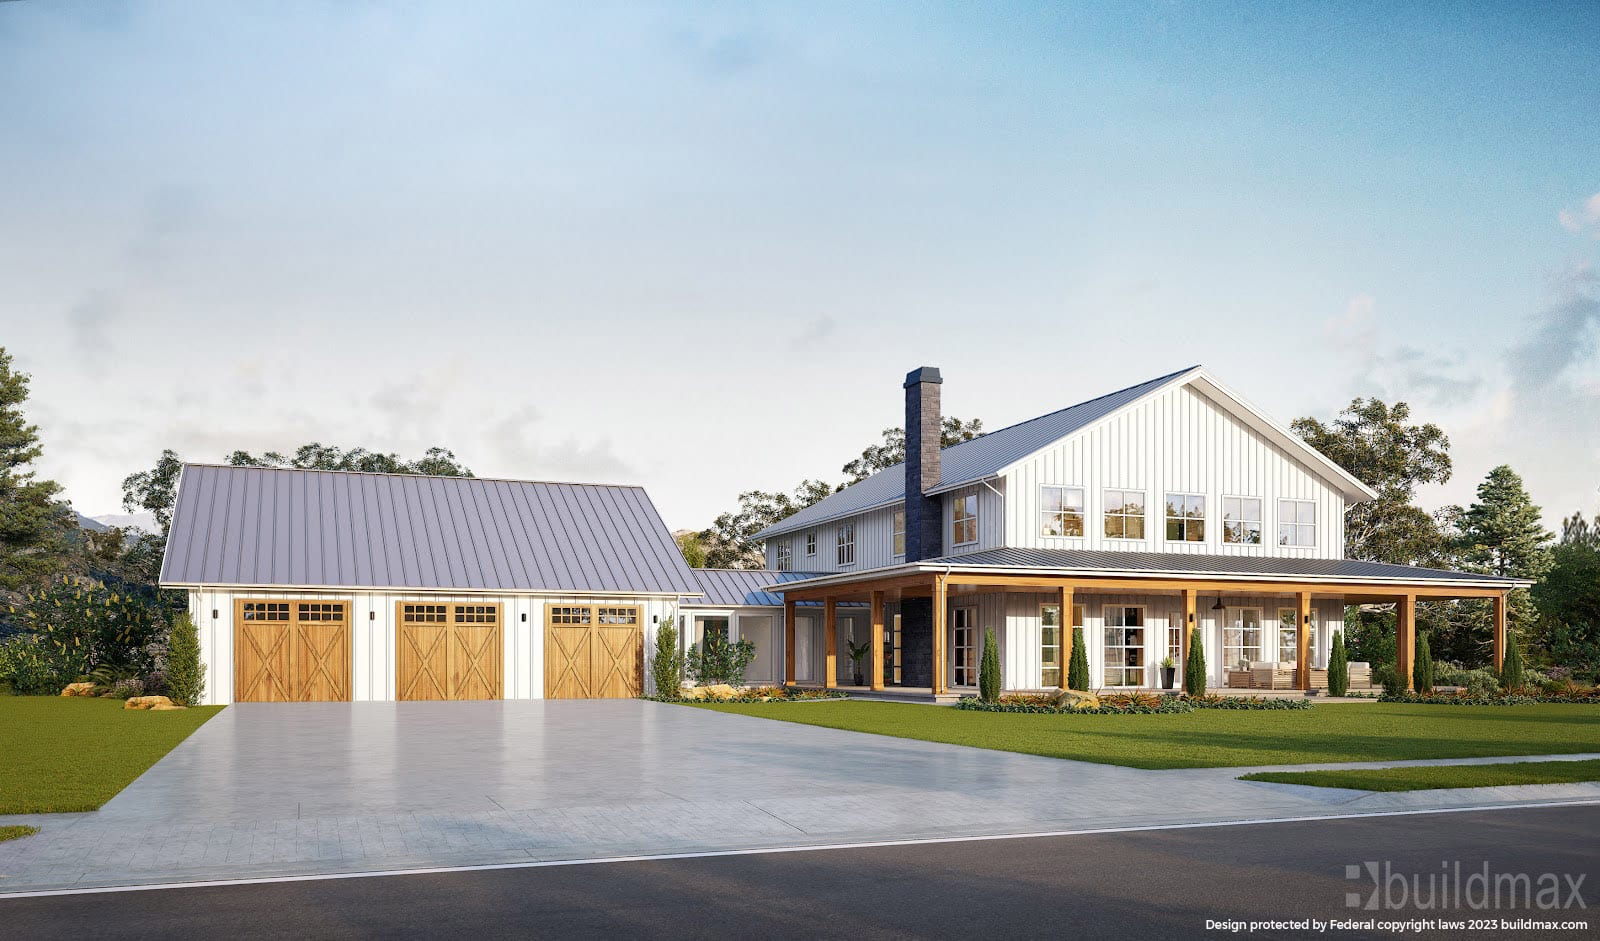 White barndominium with a garage that has three parking spaces